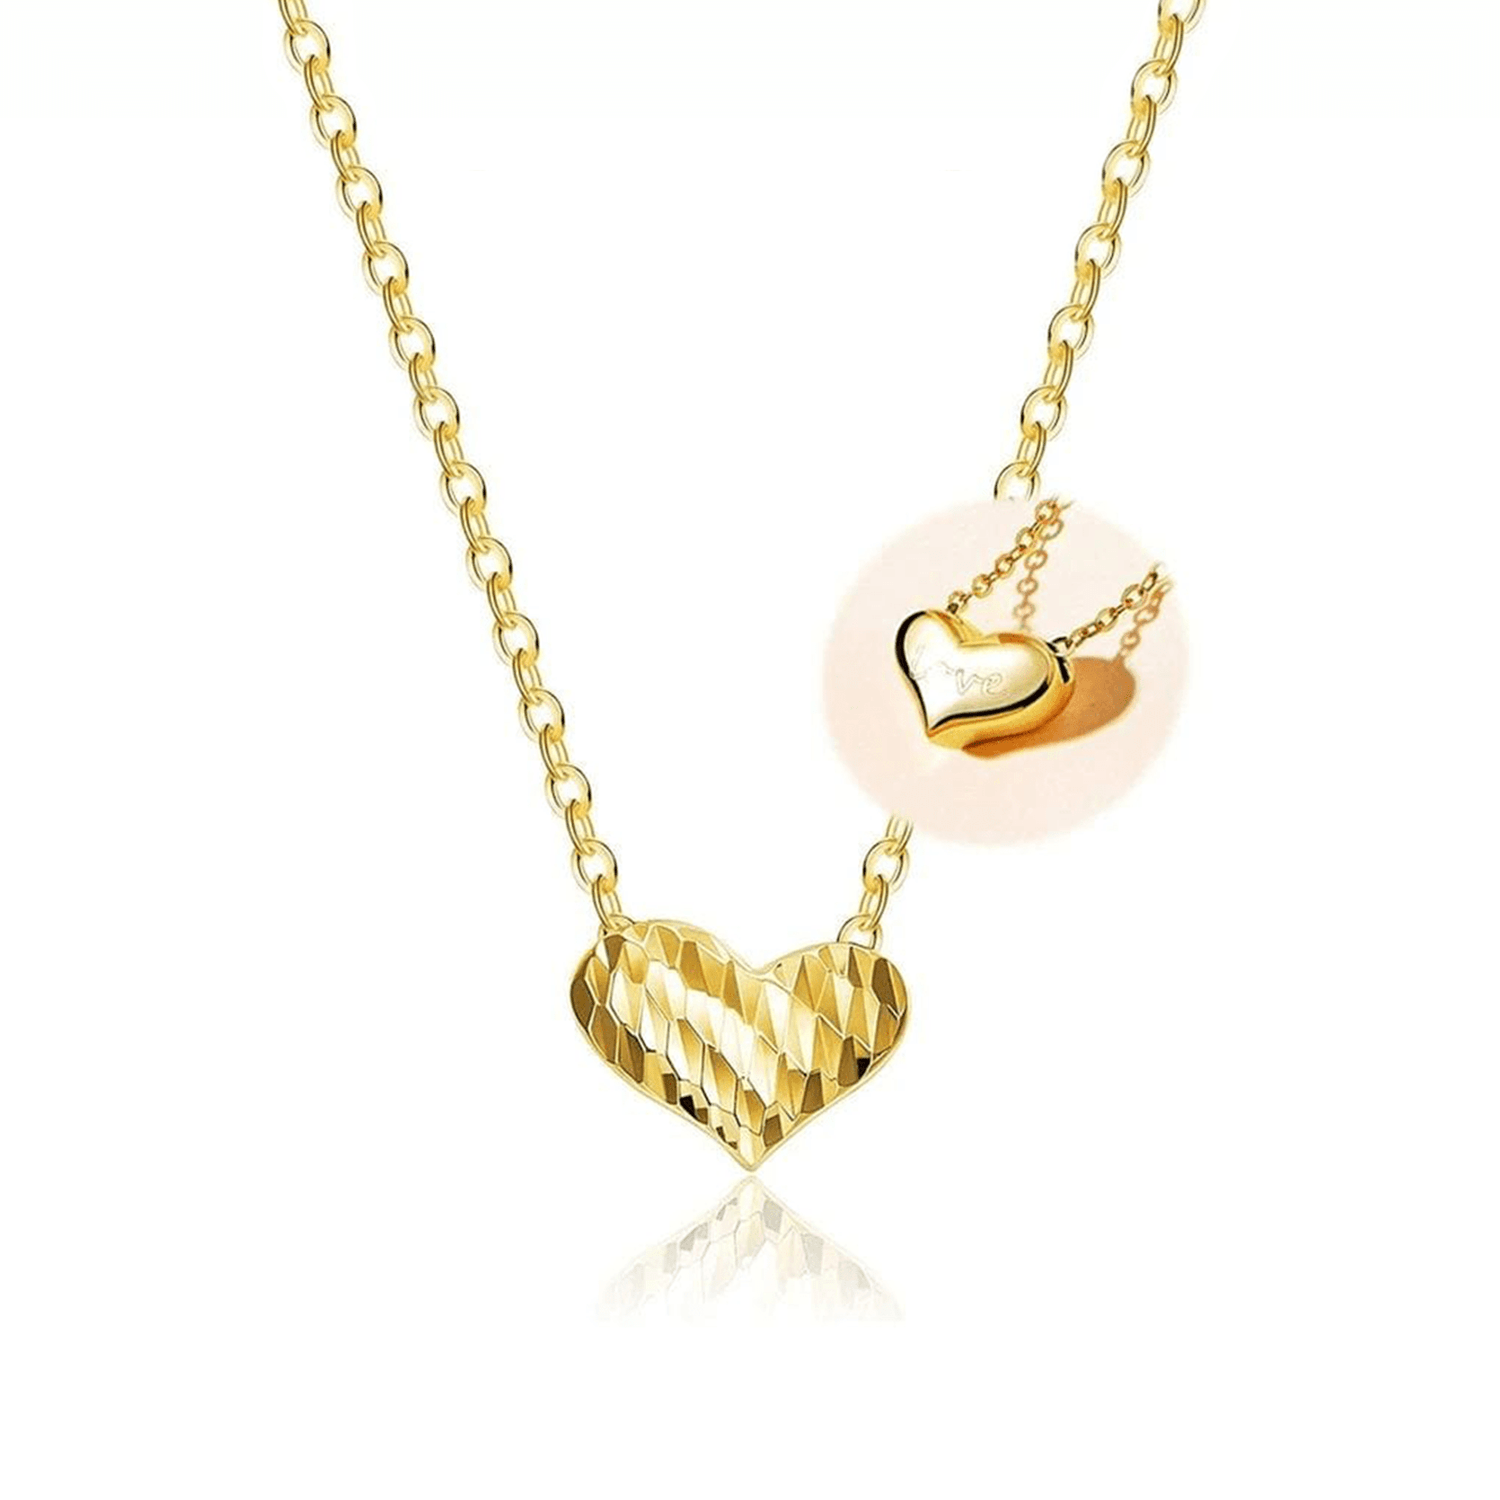 FANCIME "Heart To Heart" Engraved Love Letter 18K Gold Necklace Yellow Gold Main